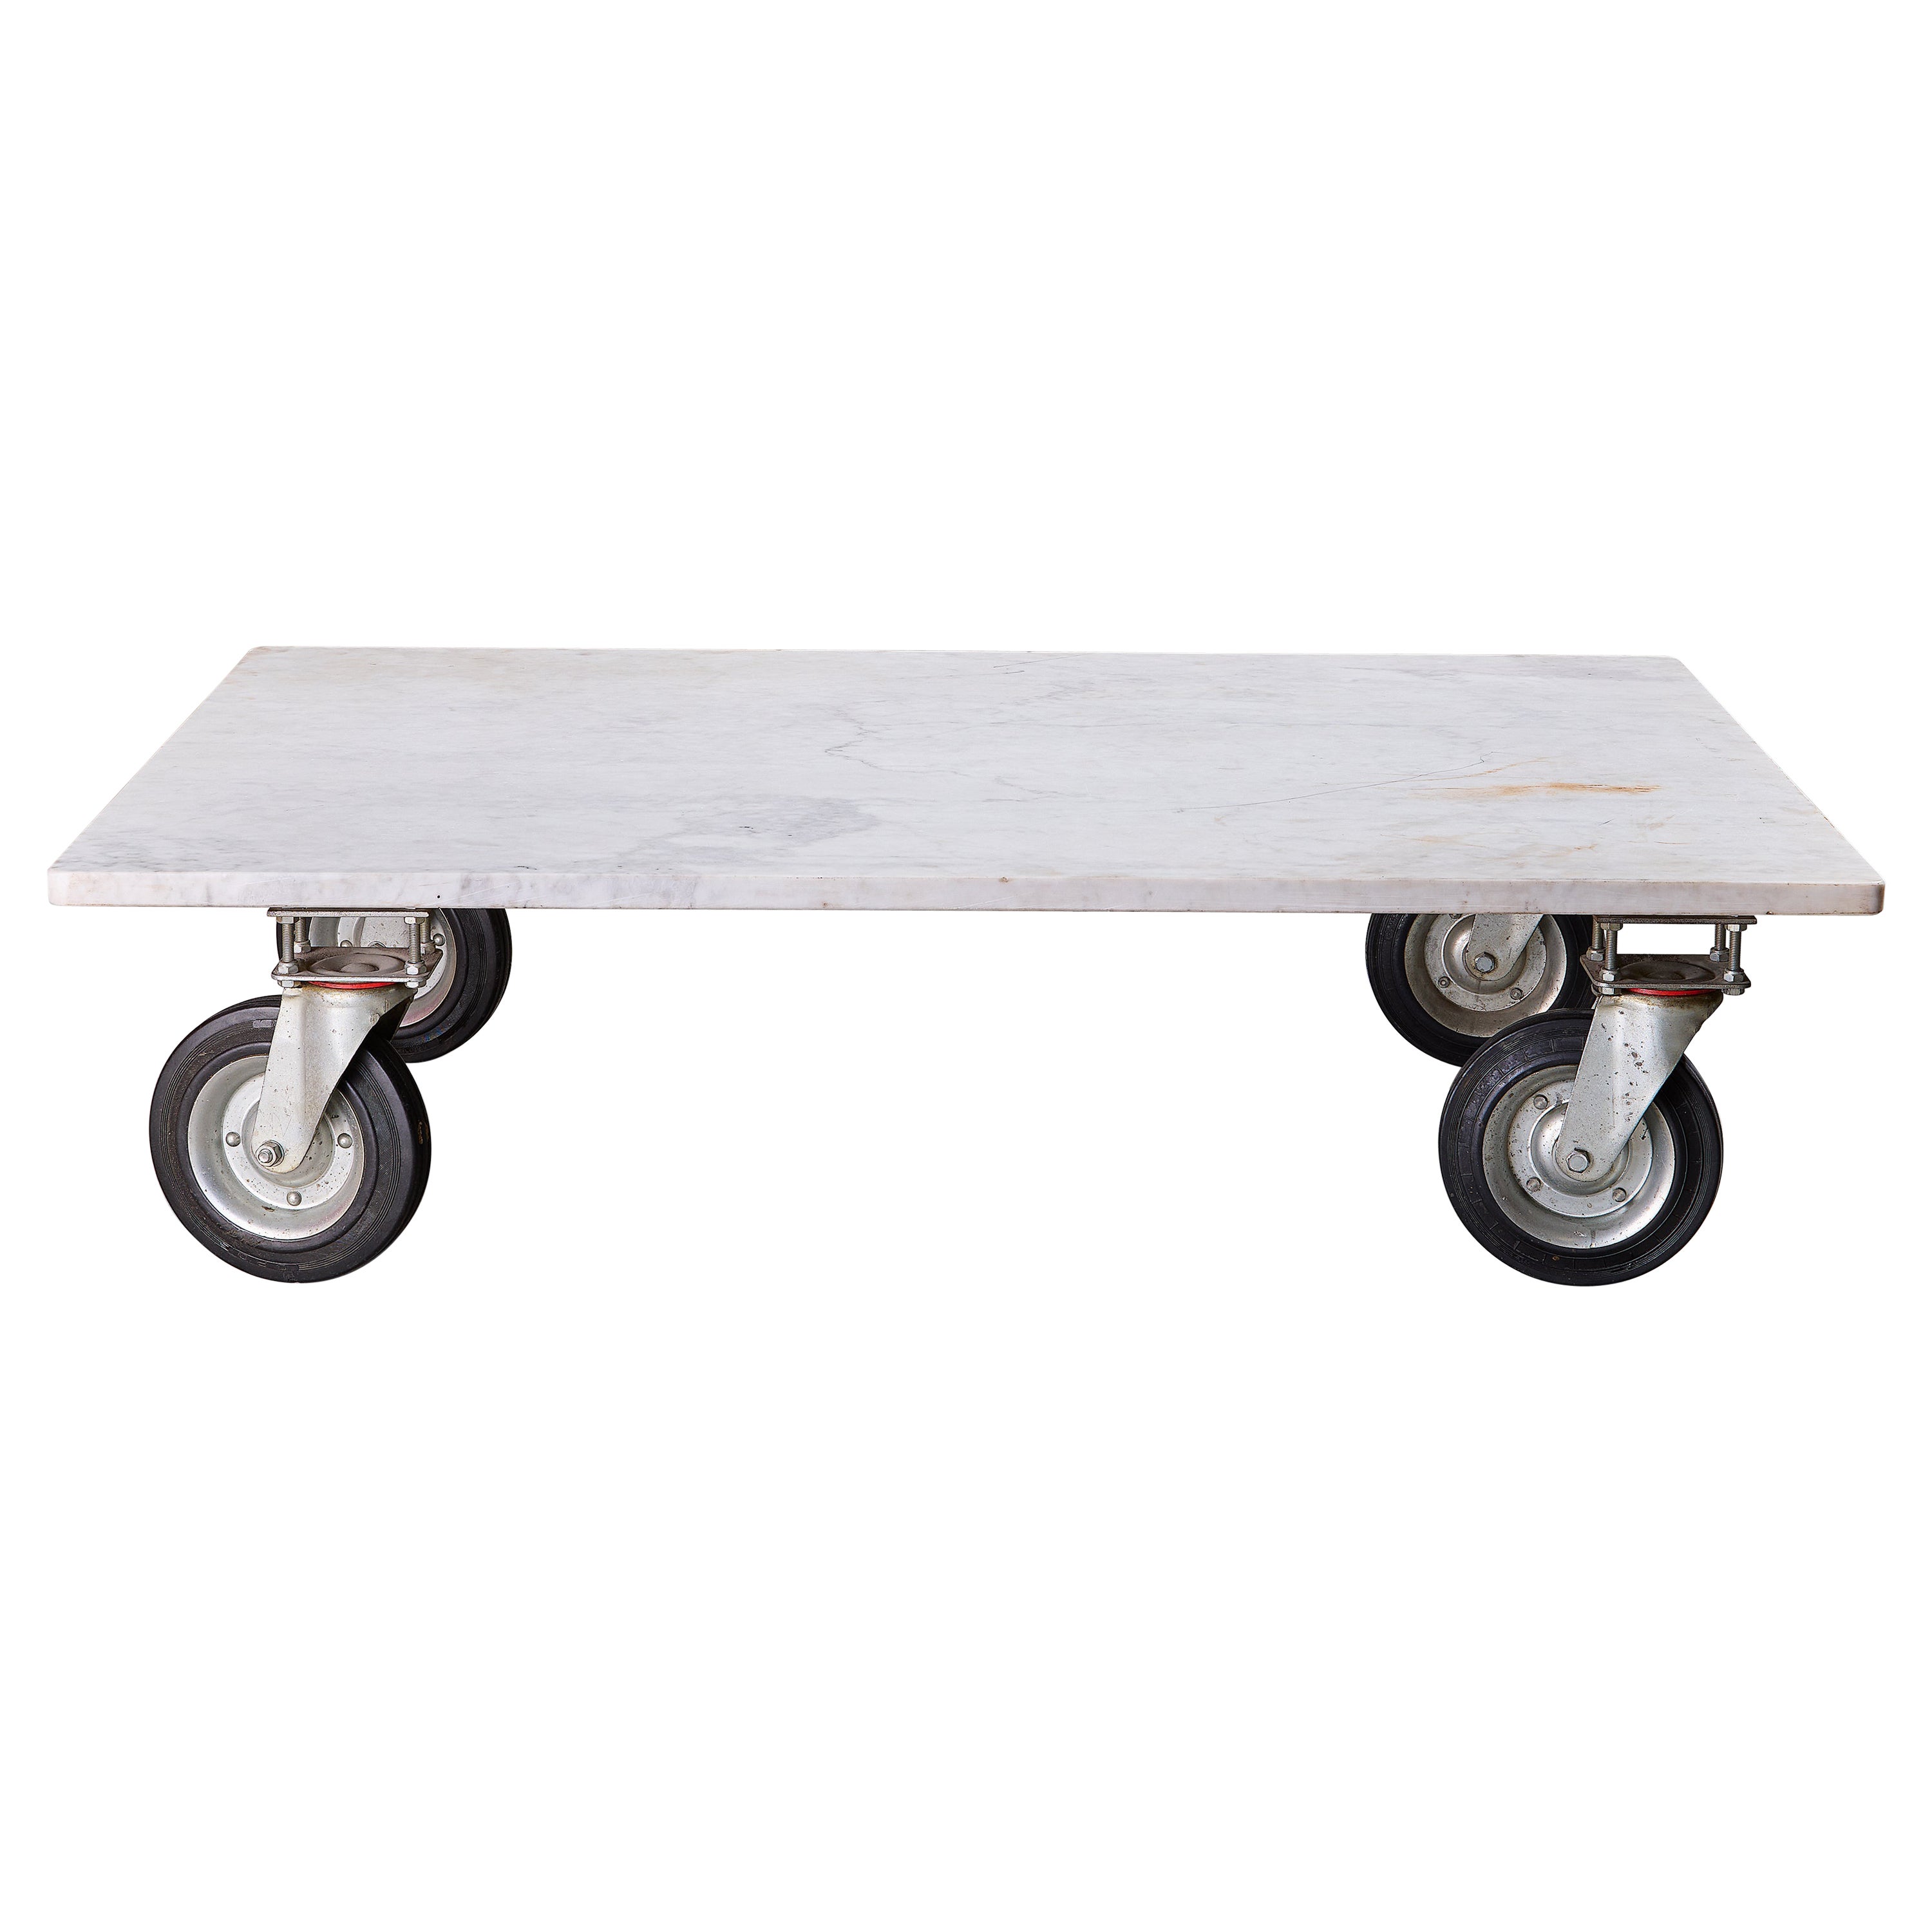 A Solid Industrial Coffee Table With Carrara Marble Top  For Sale